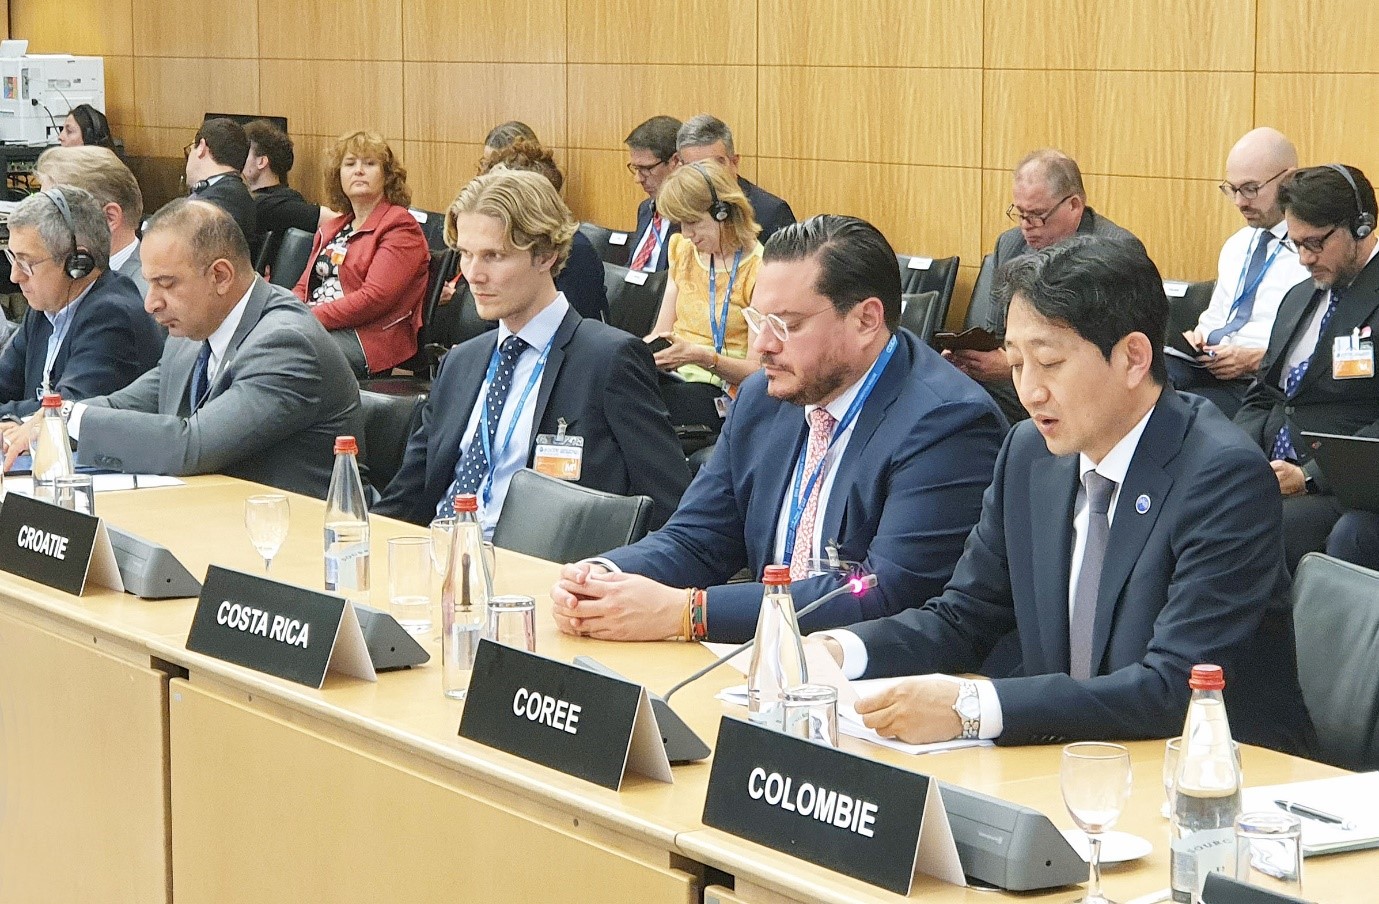 Trade Minister attends OECD Ministerial Meeting Image 0